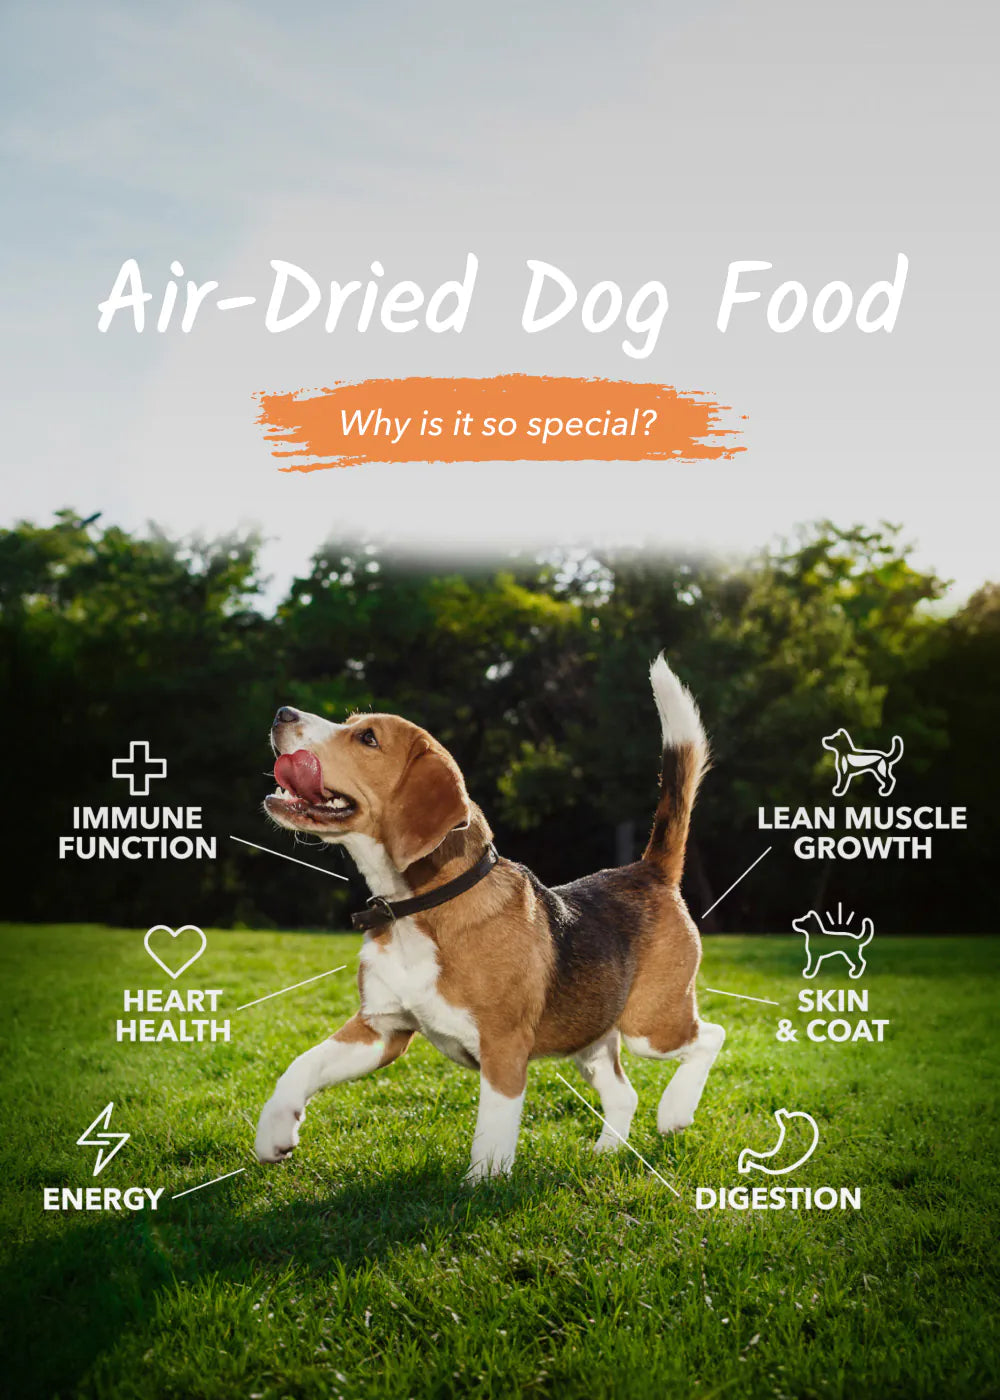 Air-Dried Dog Food - Why is it so special? - Immune Function - Heart Health - Energy - Lean Muscle Growth - Skin & Coat - Digestion